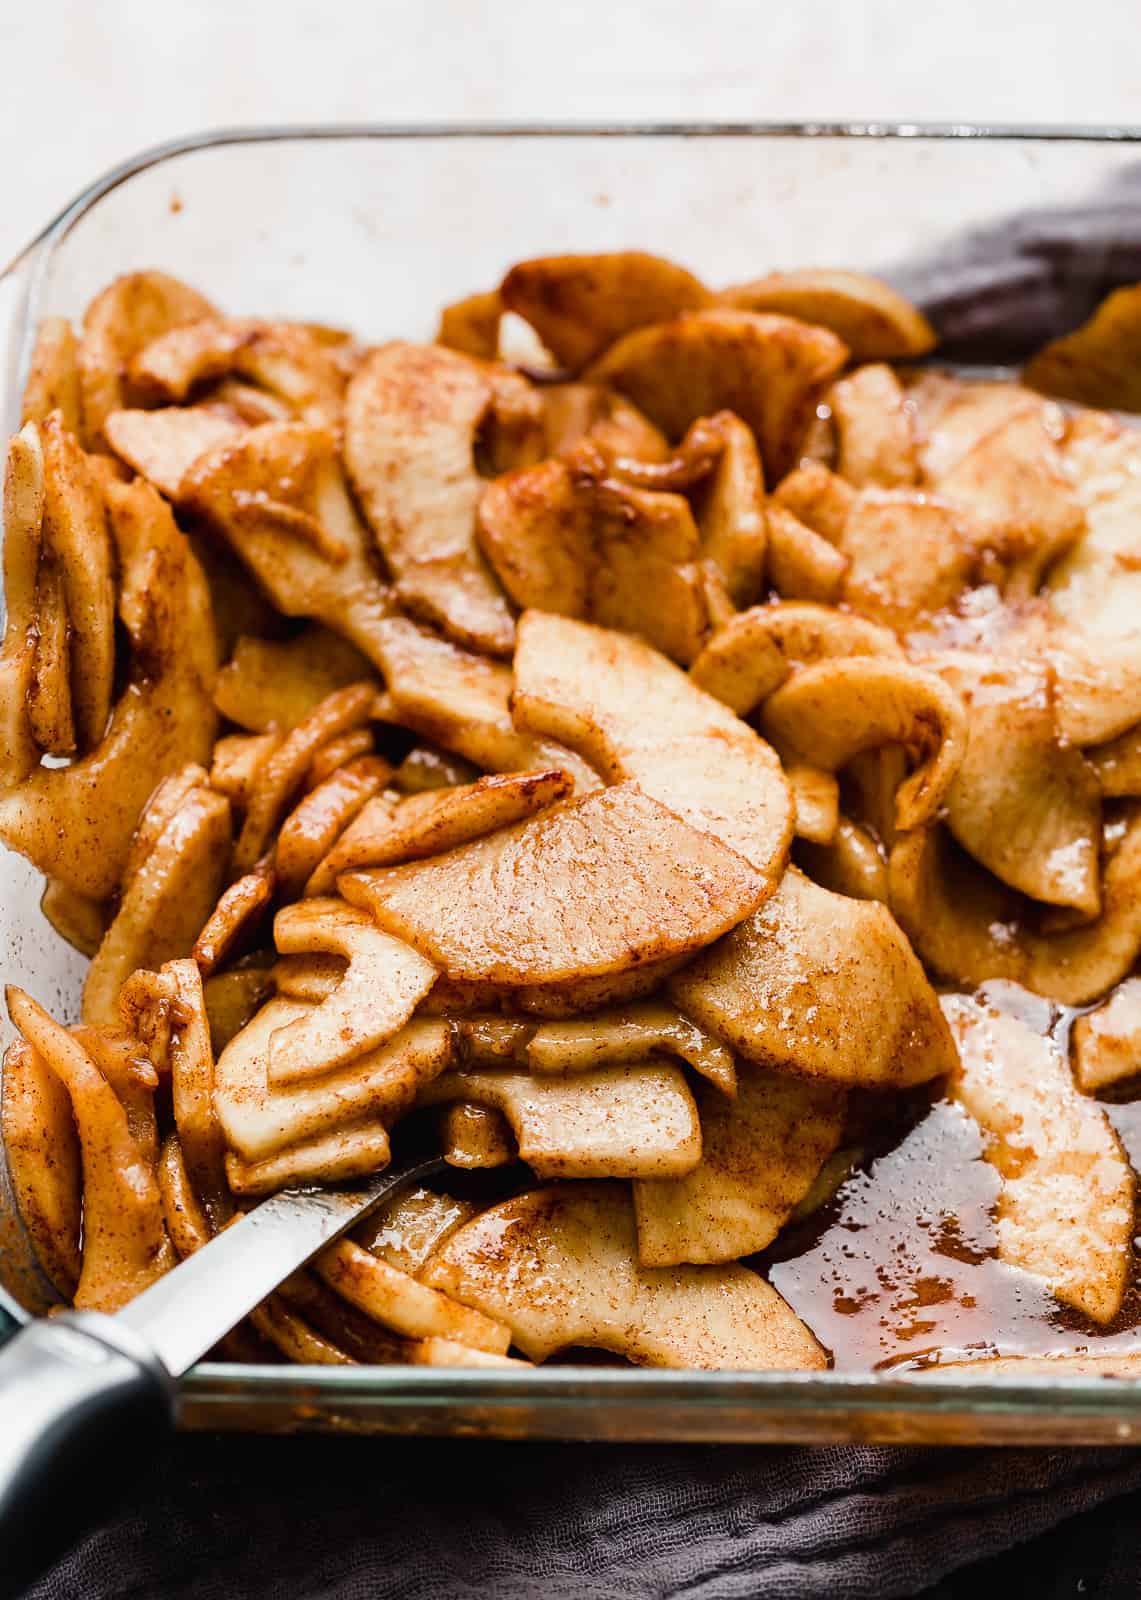 Thinly sliced baked cinnamon apples in a baking dish.